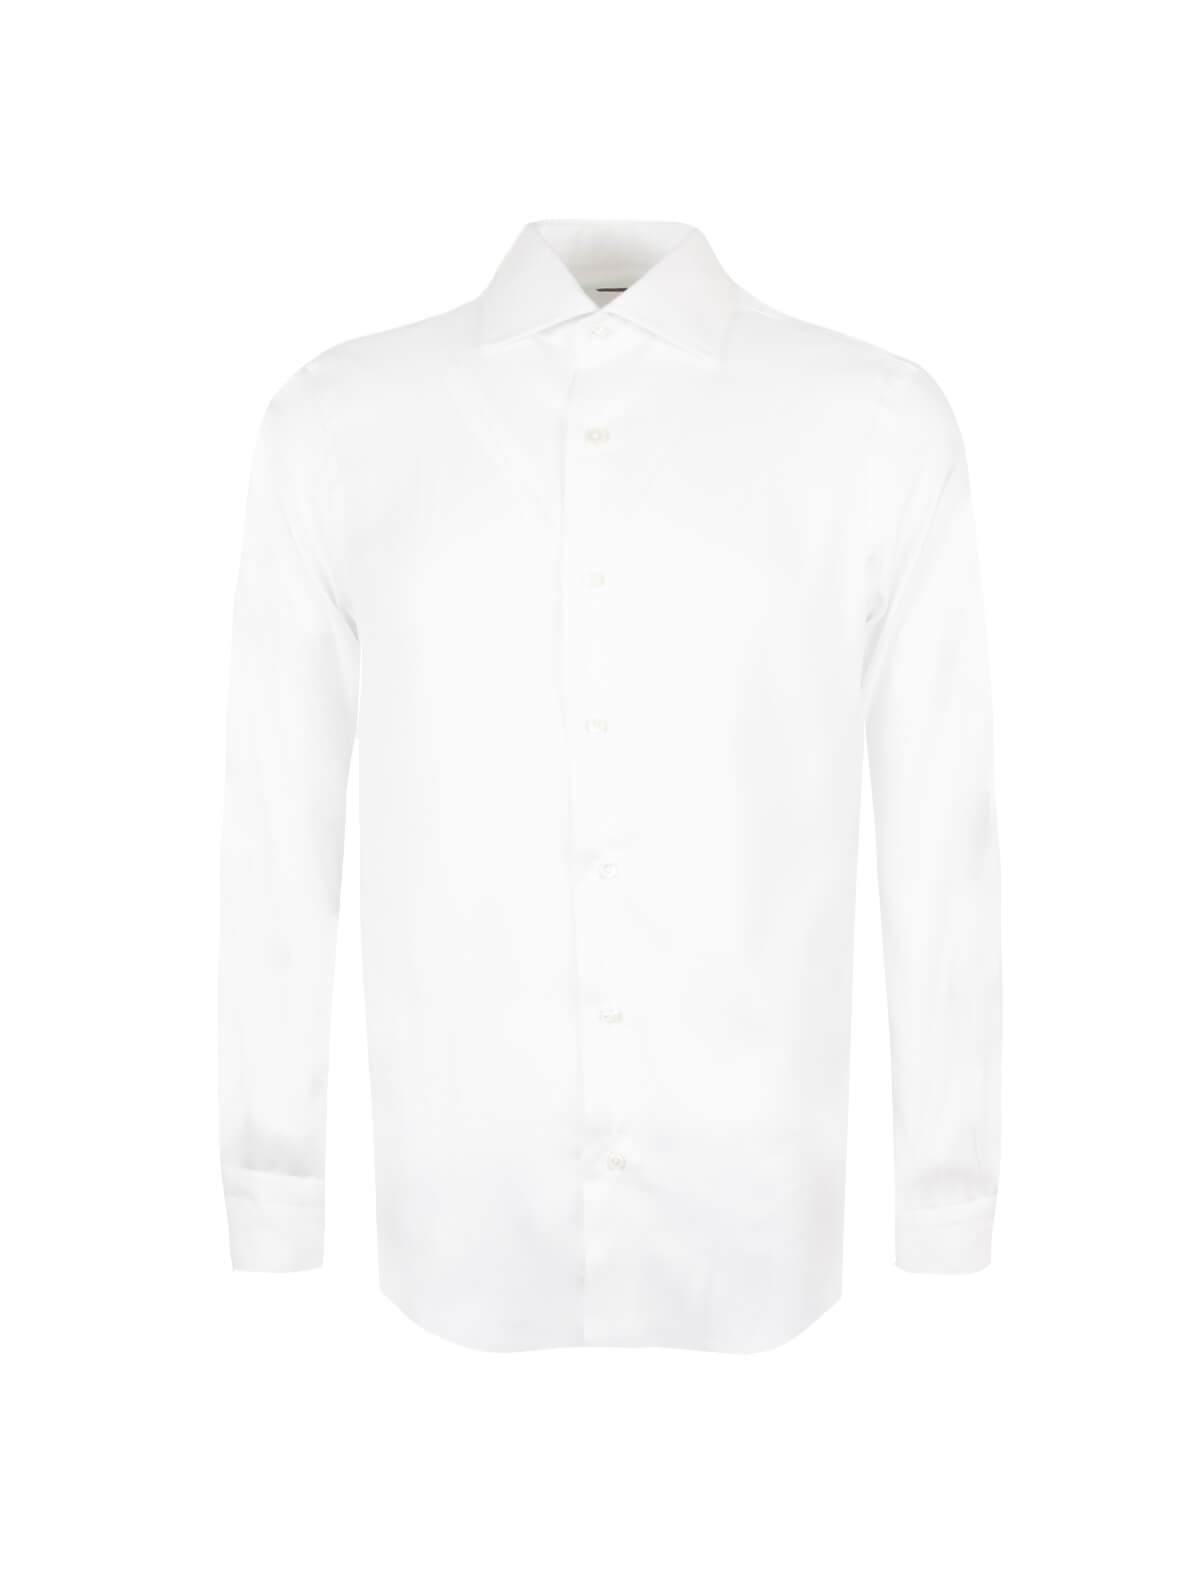 BARBA Journey Wrinkle-Resistant Textured Shirt in White | CLOSET Singapore